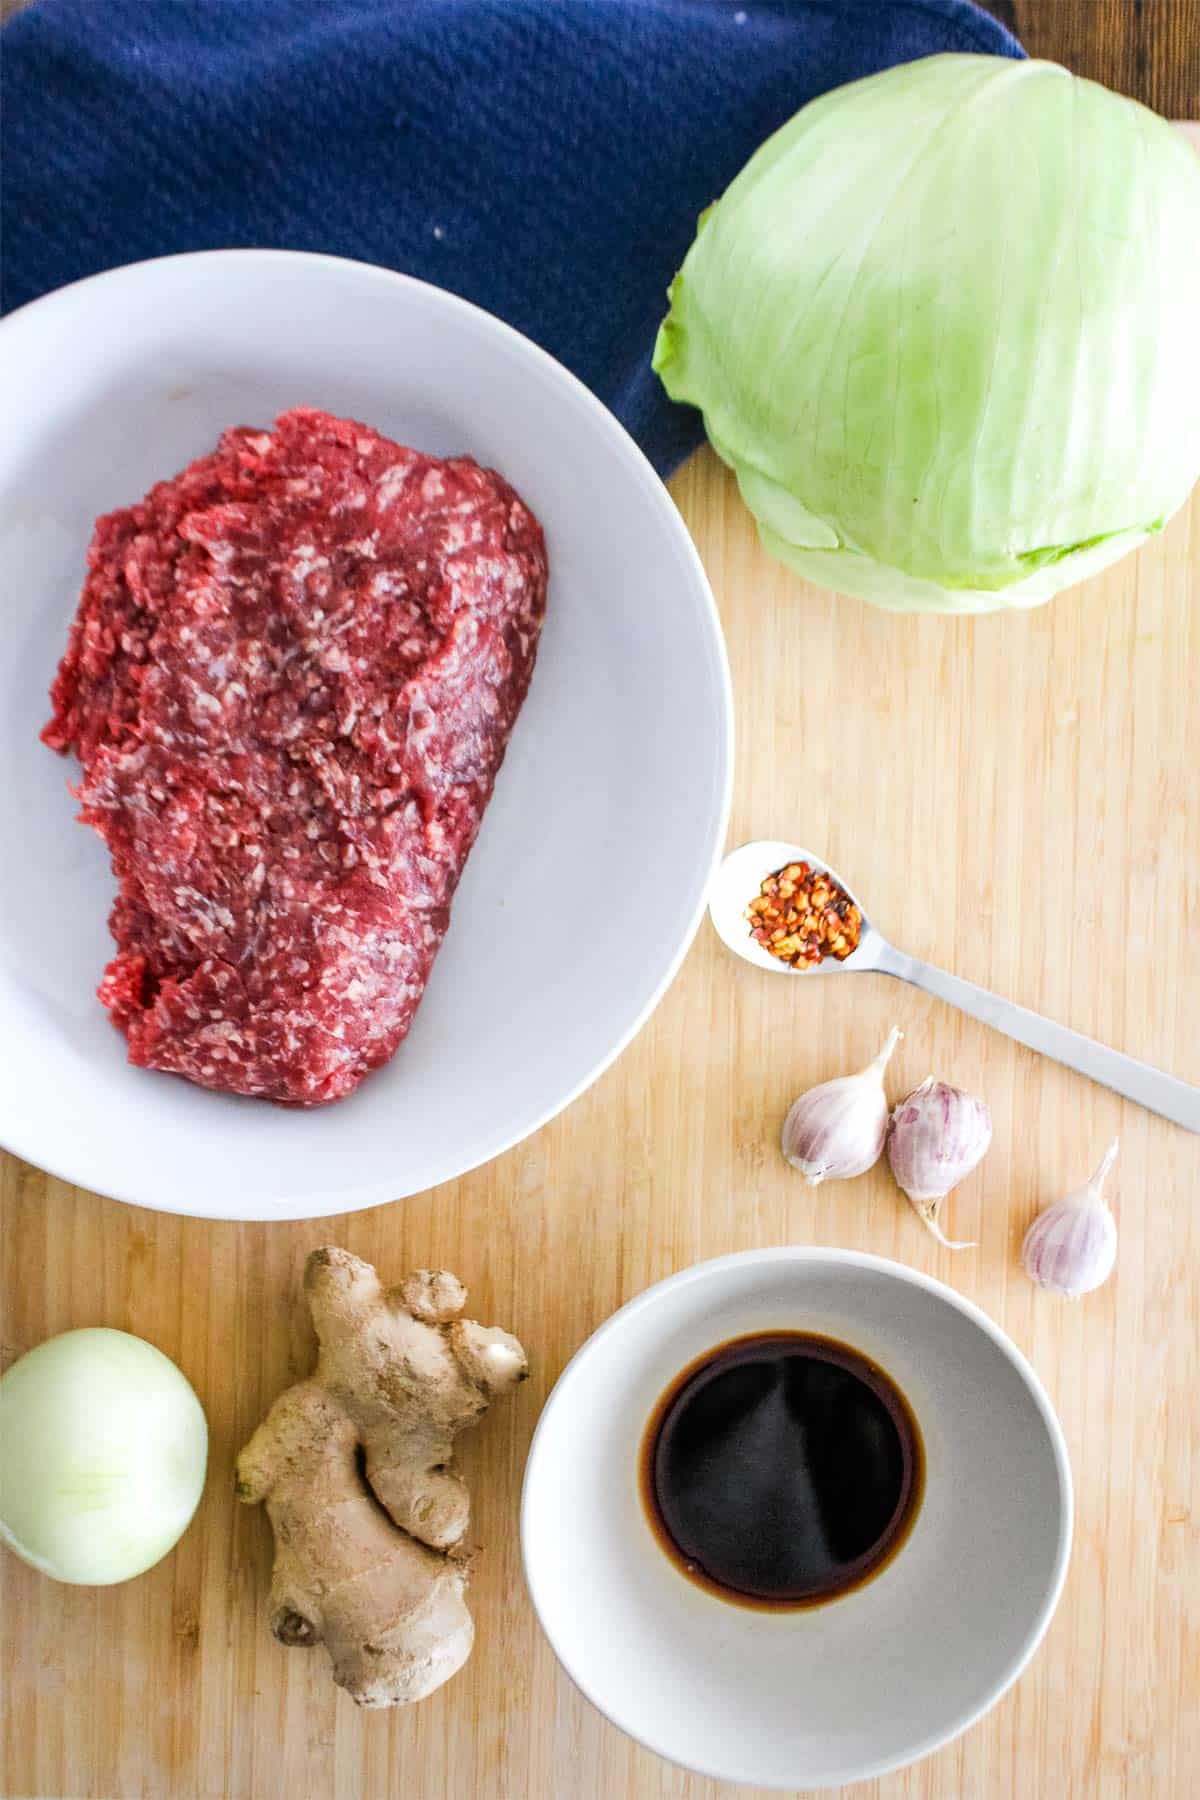 Ingredients to make ground beef and cabbage stir fry on the table.